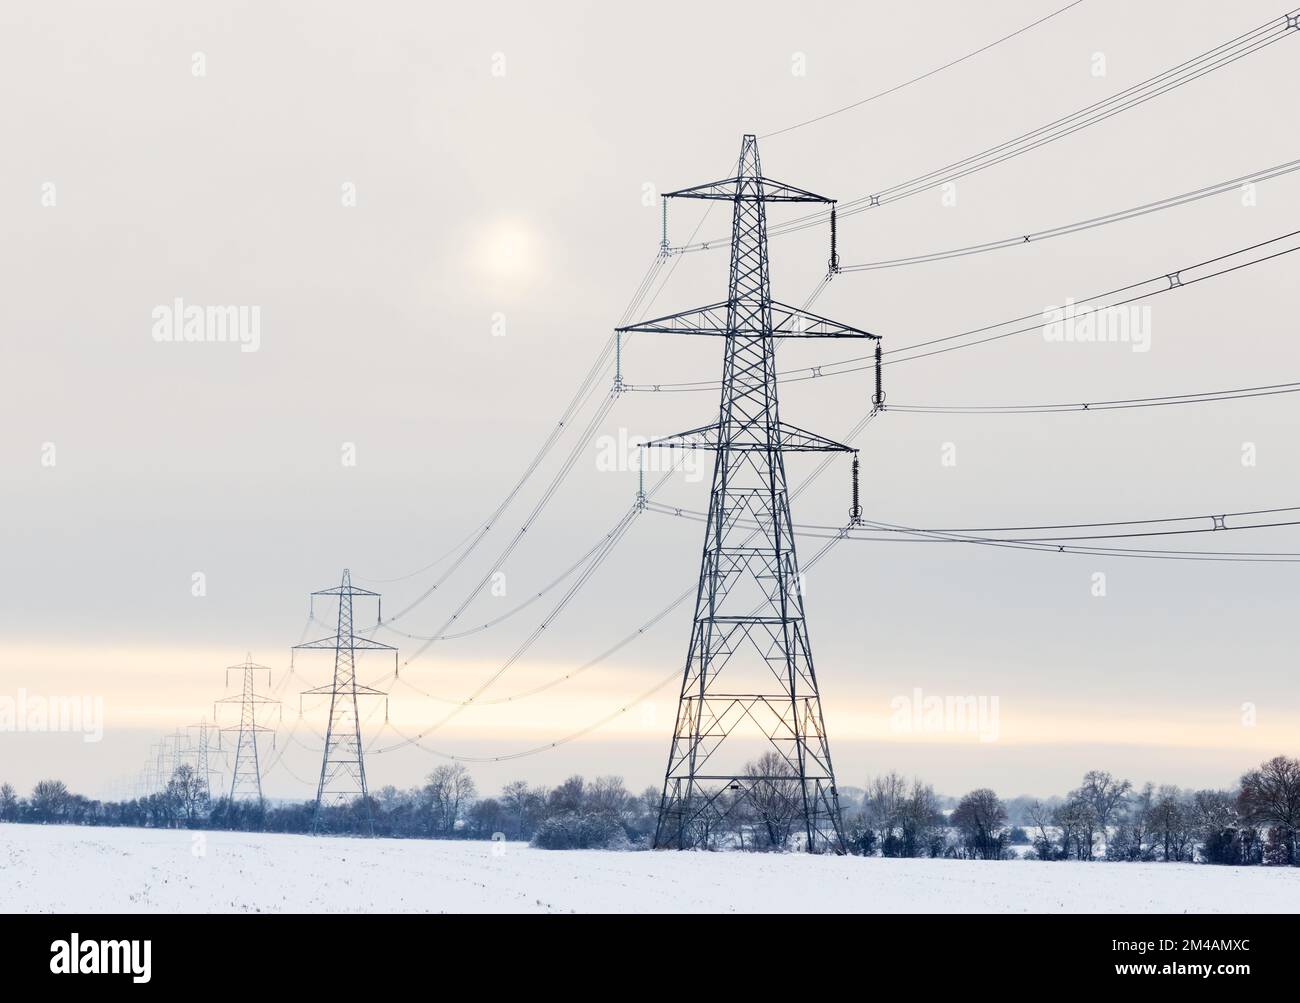 Electricity pylons in a winter landscape with snow. UK Stock Photo